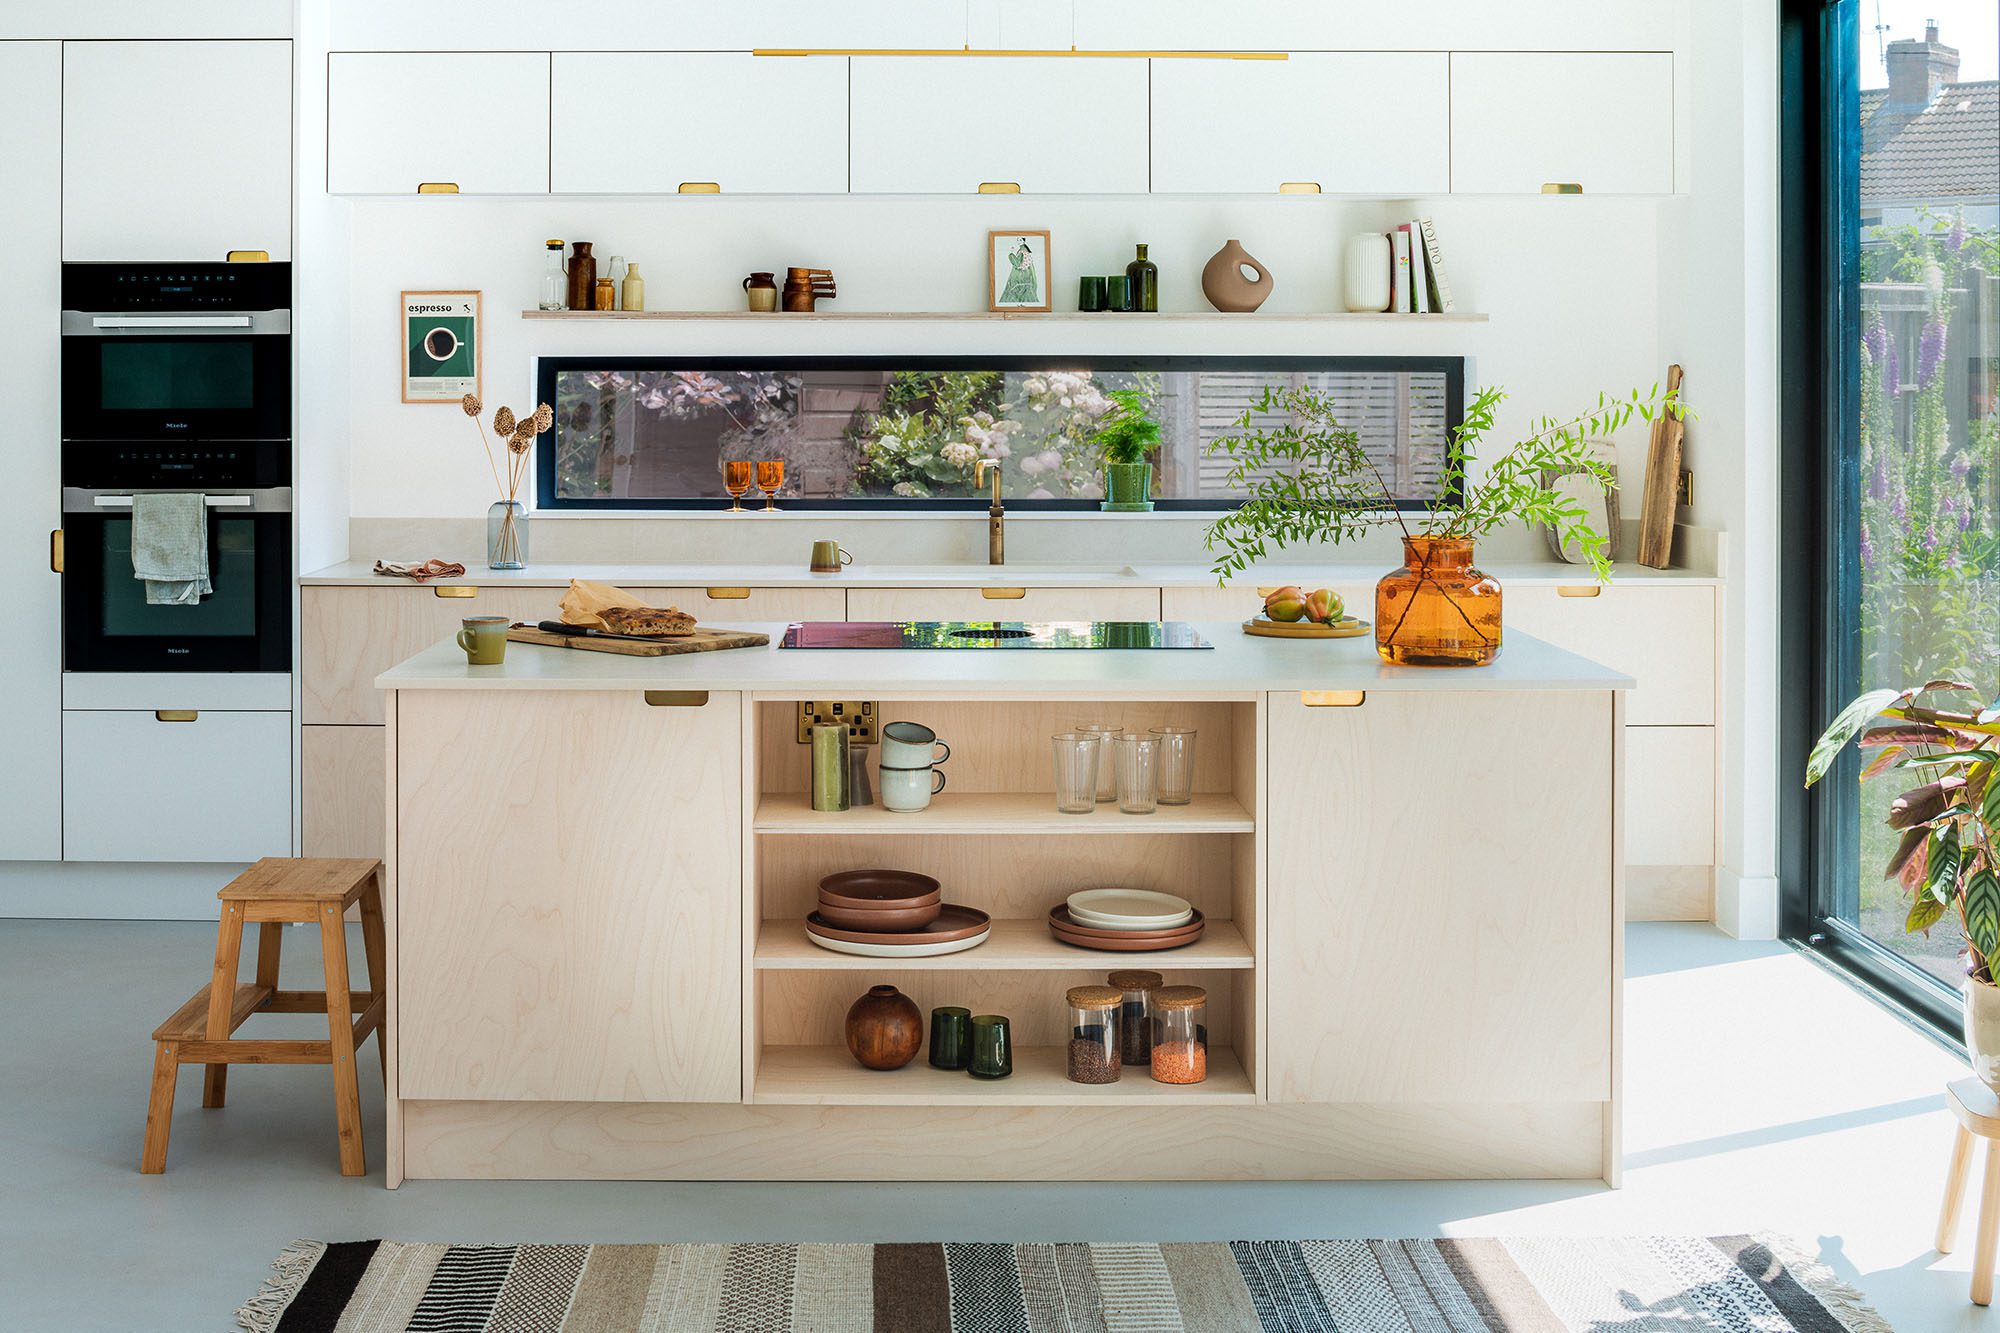 Husk's Greenhill Kitchen, featuring plywood kitchen fronts with integrated handles.